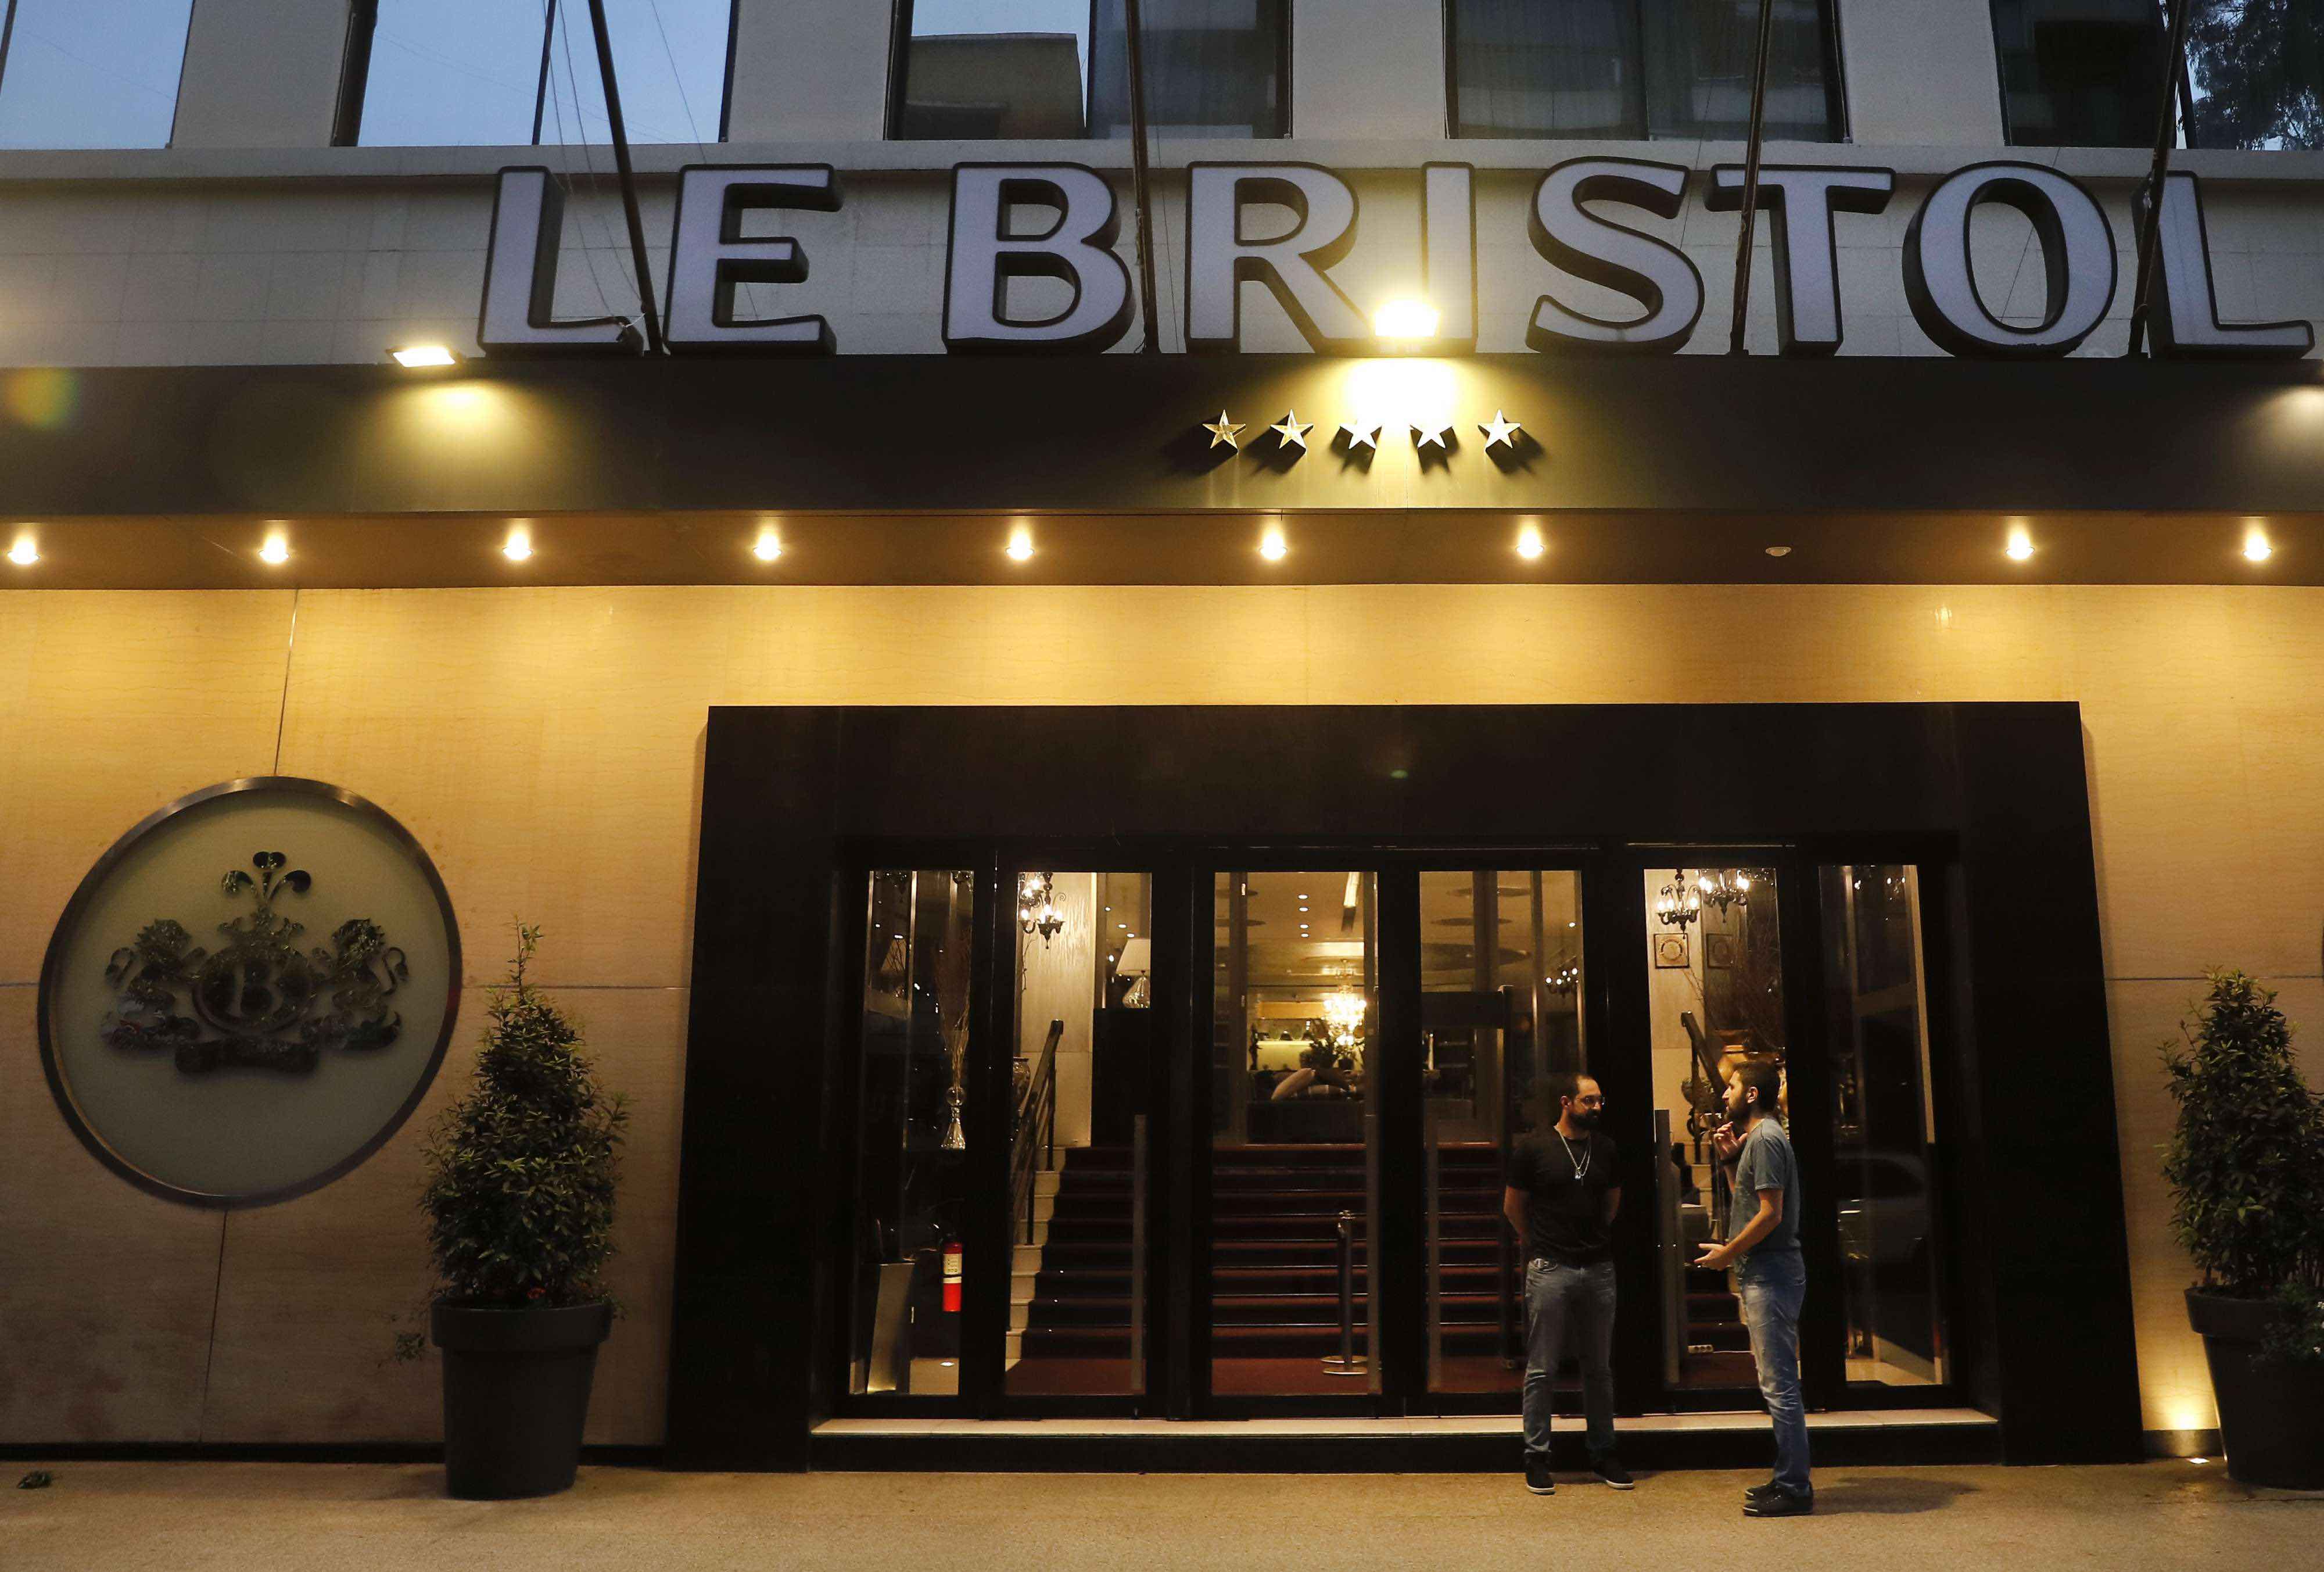 Designed by French interior designer Jean Royere, Le Bristol was first opened in 1951